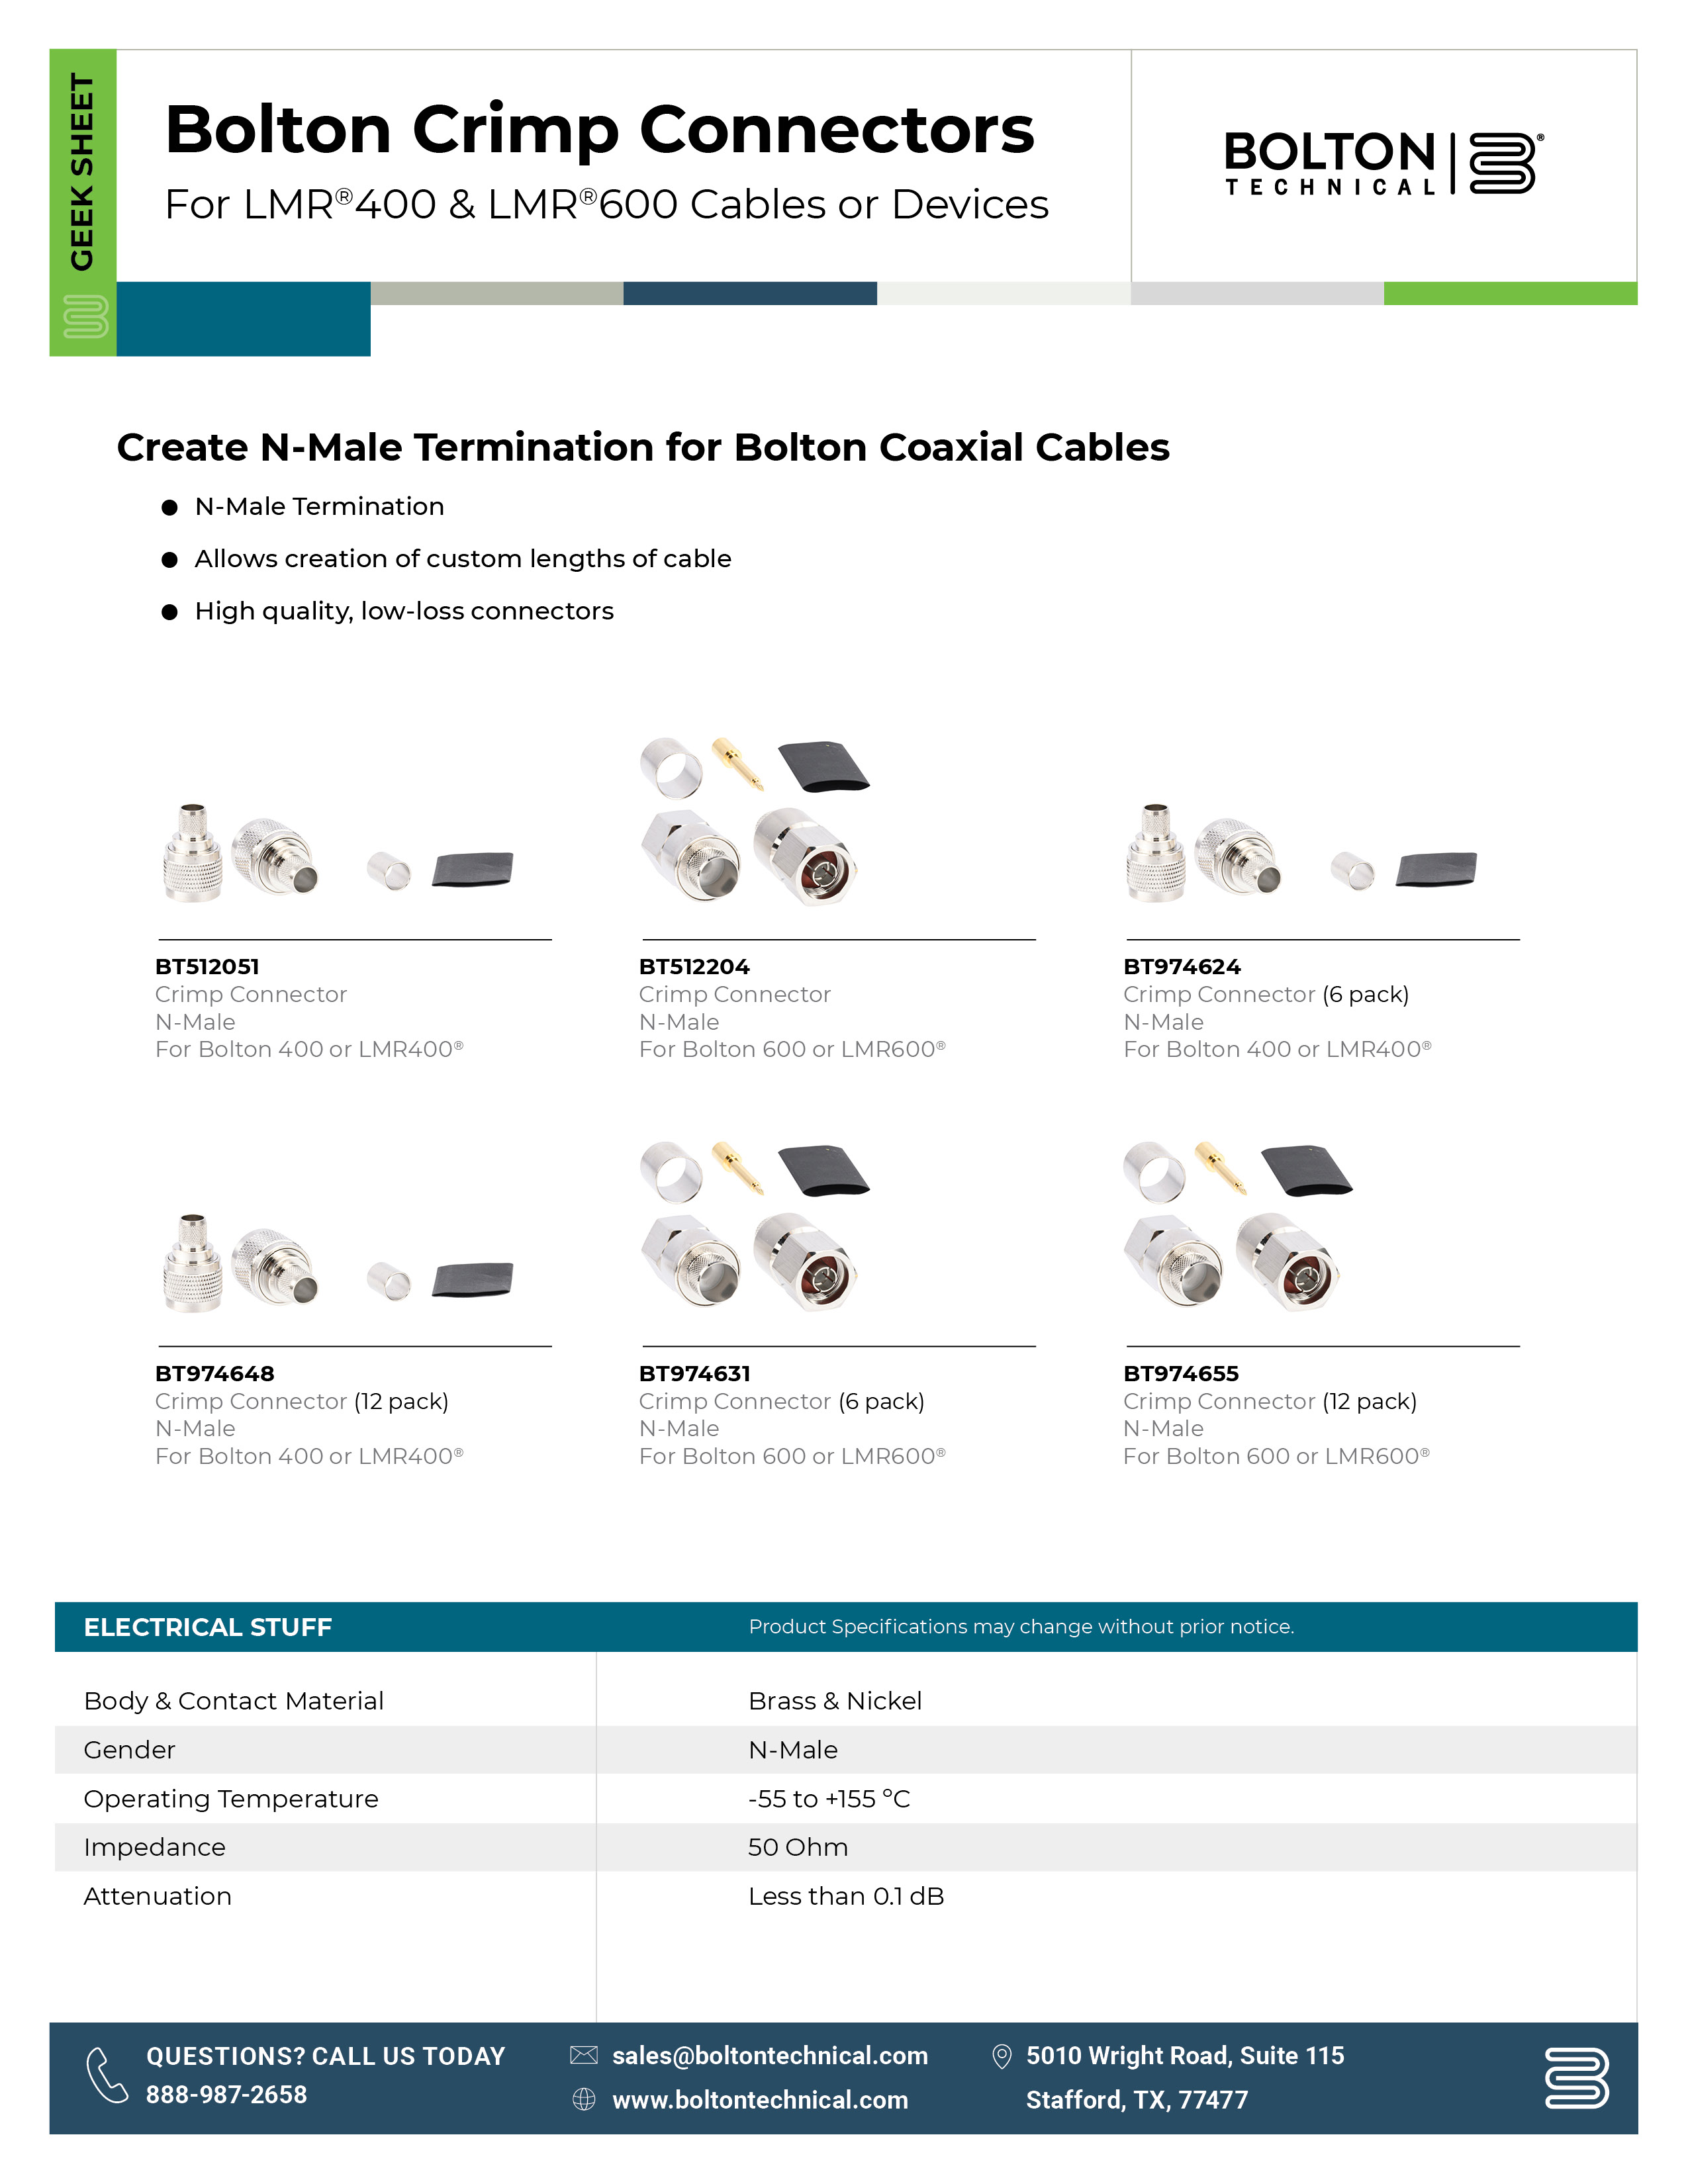 Crimp Connector Specifications